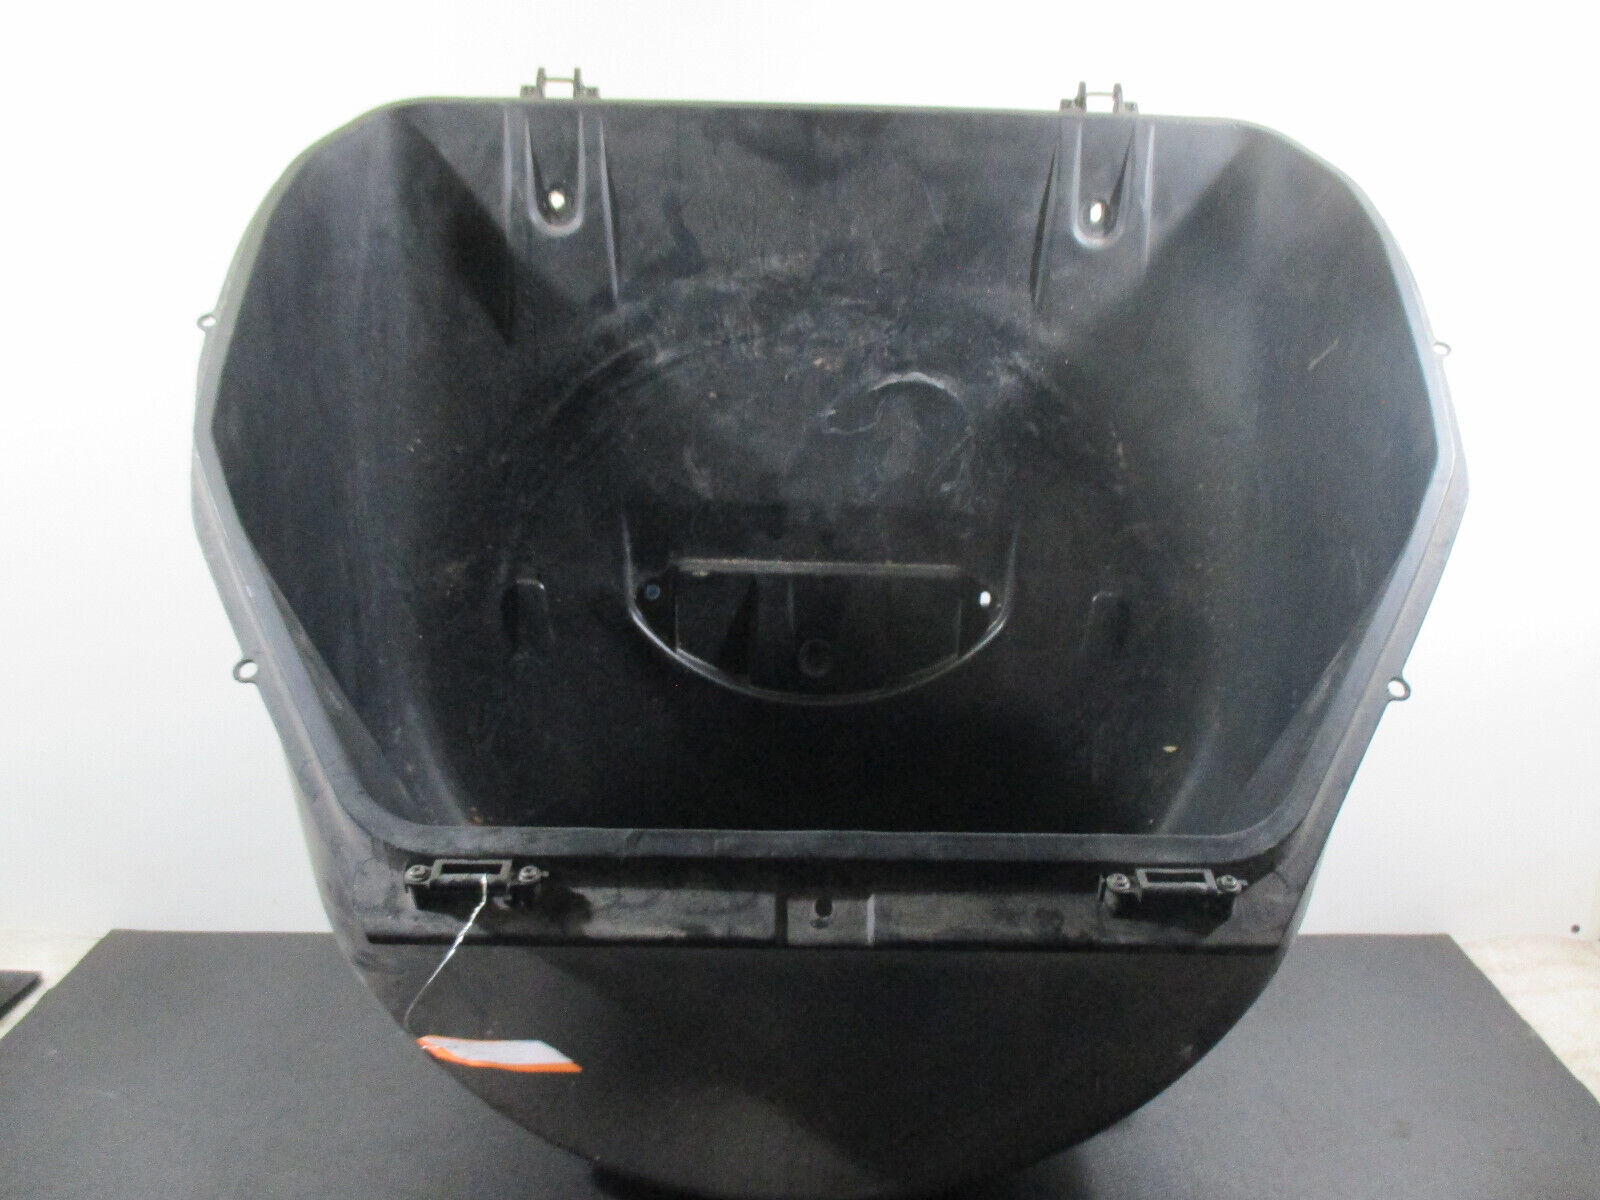 2000 Toyota MR2 Spyder - Front Hood Spare Tire Storage Tray Box (FLAWS)